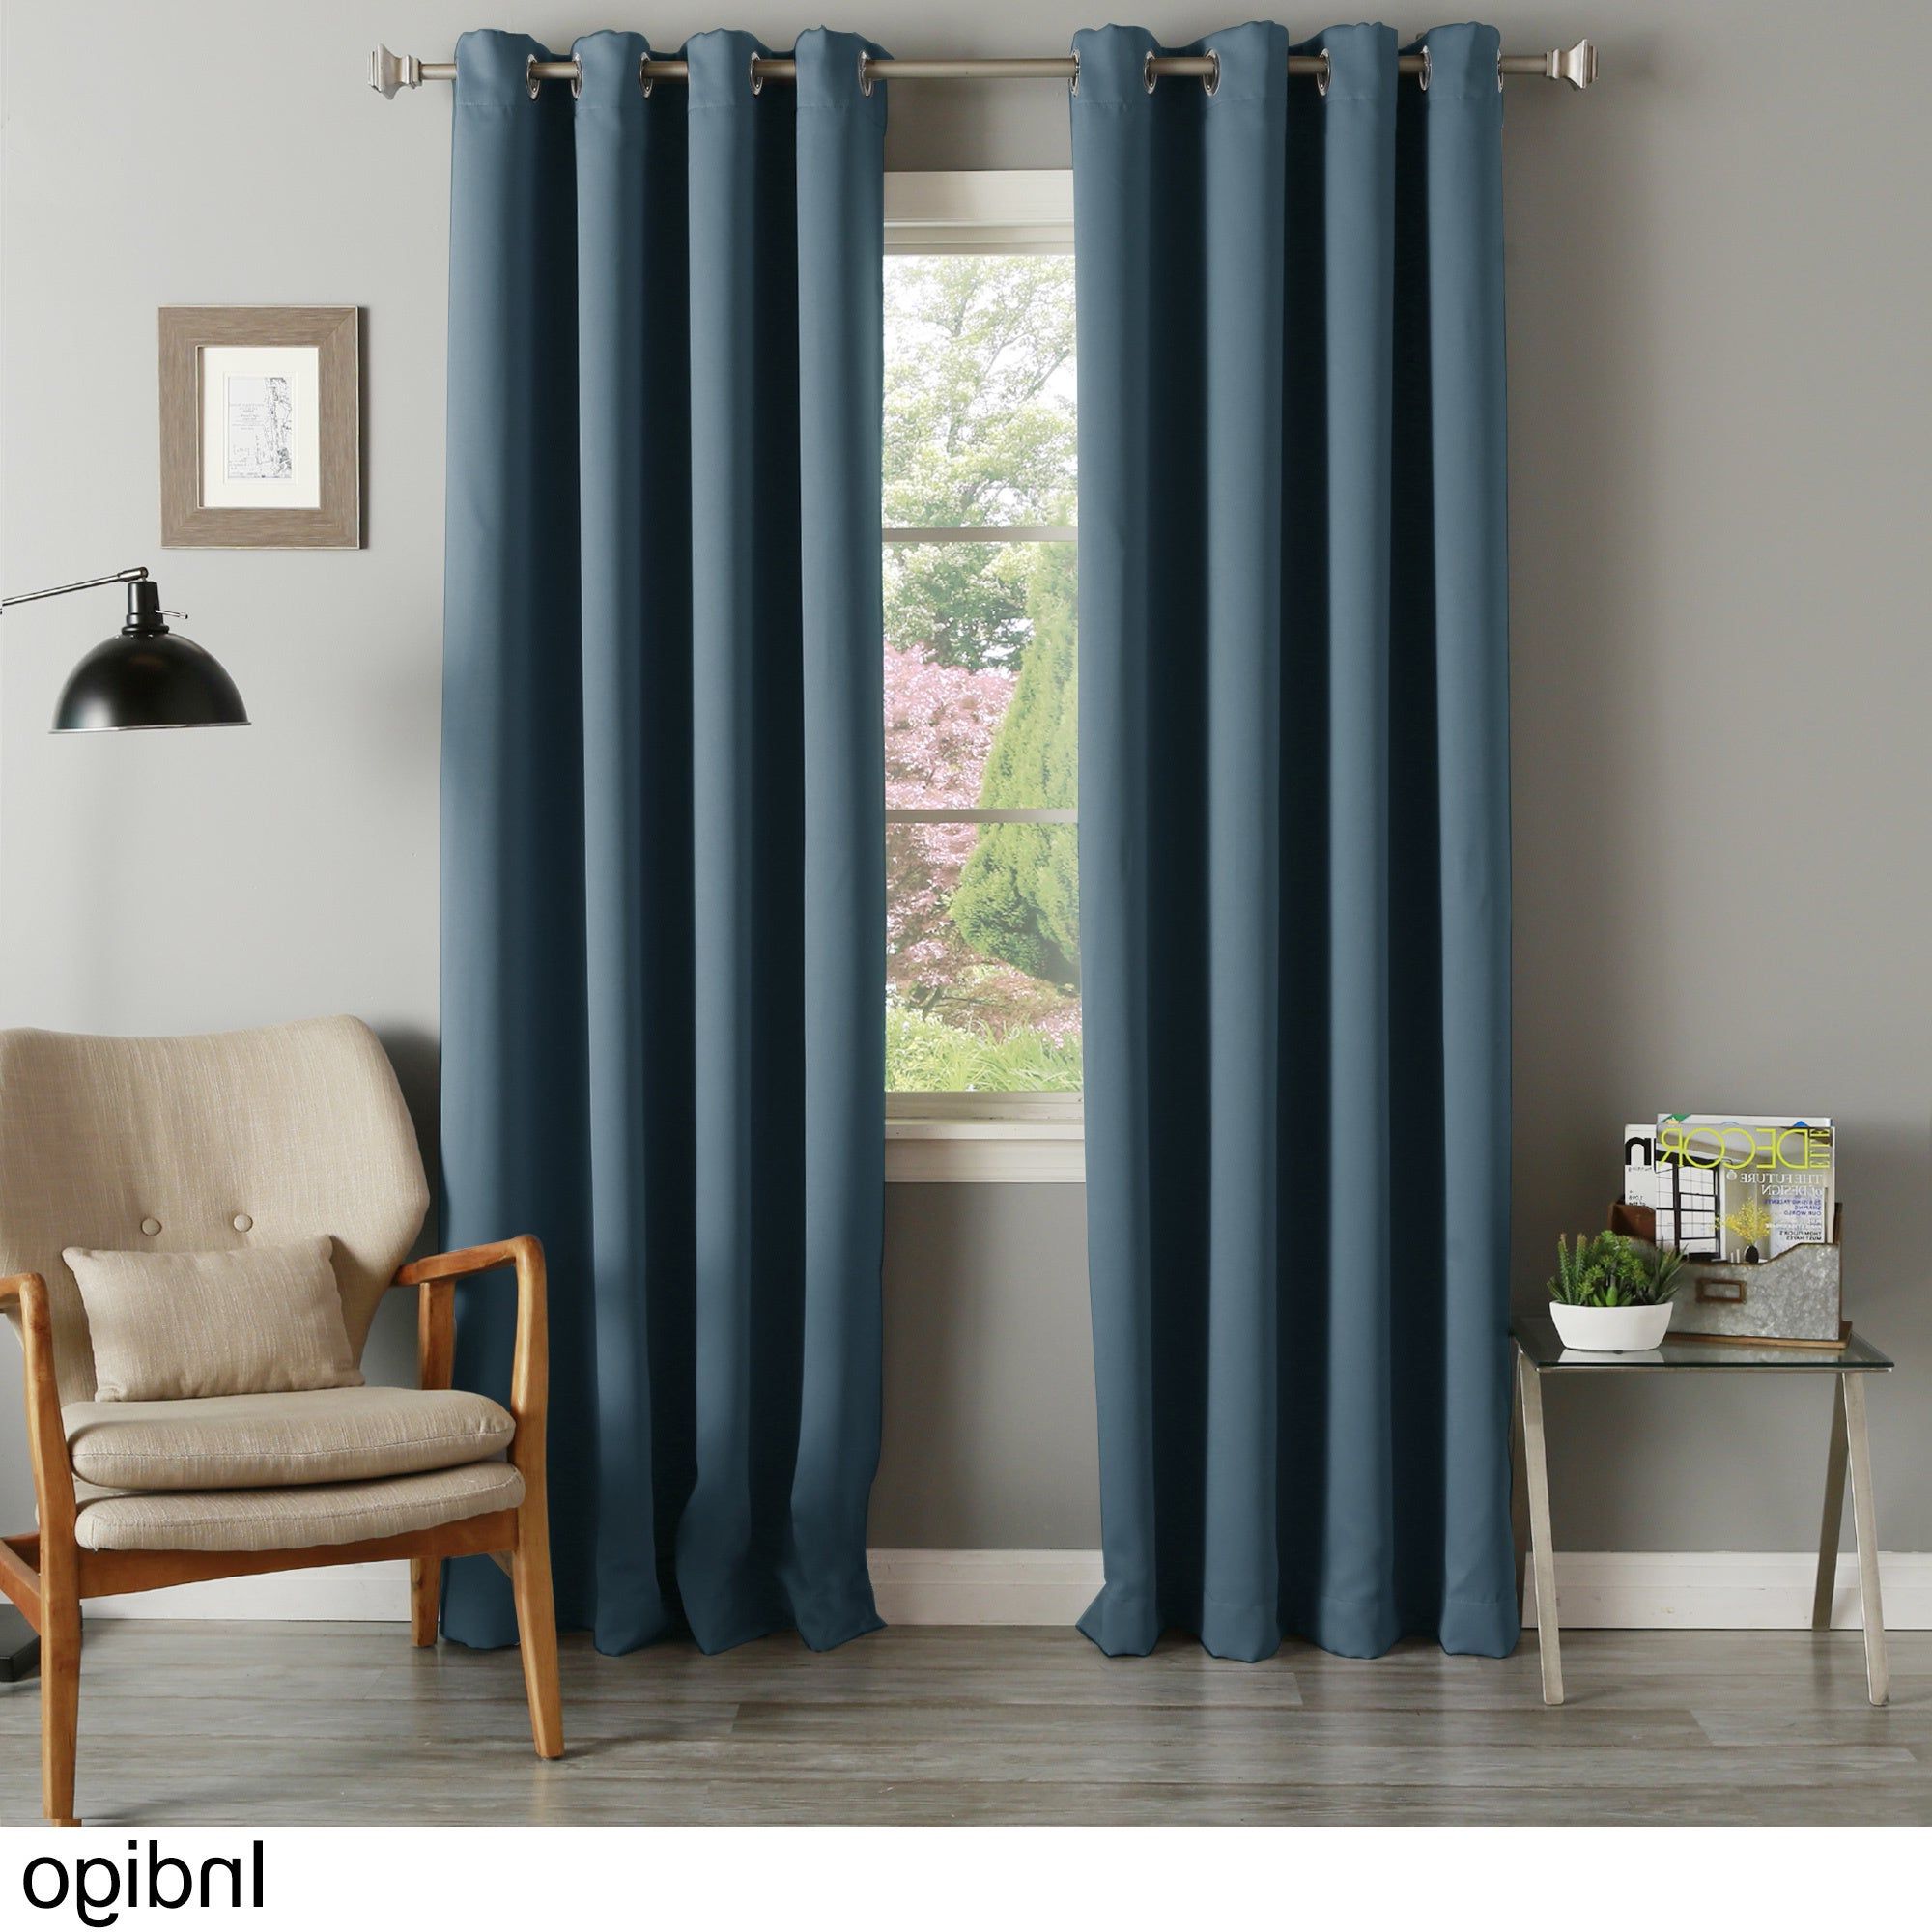 Newest Aurora Home Silvertone Grommet Thermal Insulated Blackout Curtain Panel Pair With Regard To Silvertone Grommet Thermal Insulated Blackout Curtain Panel Pairs (View 1 of 20)